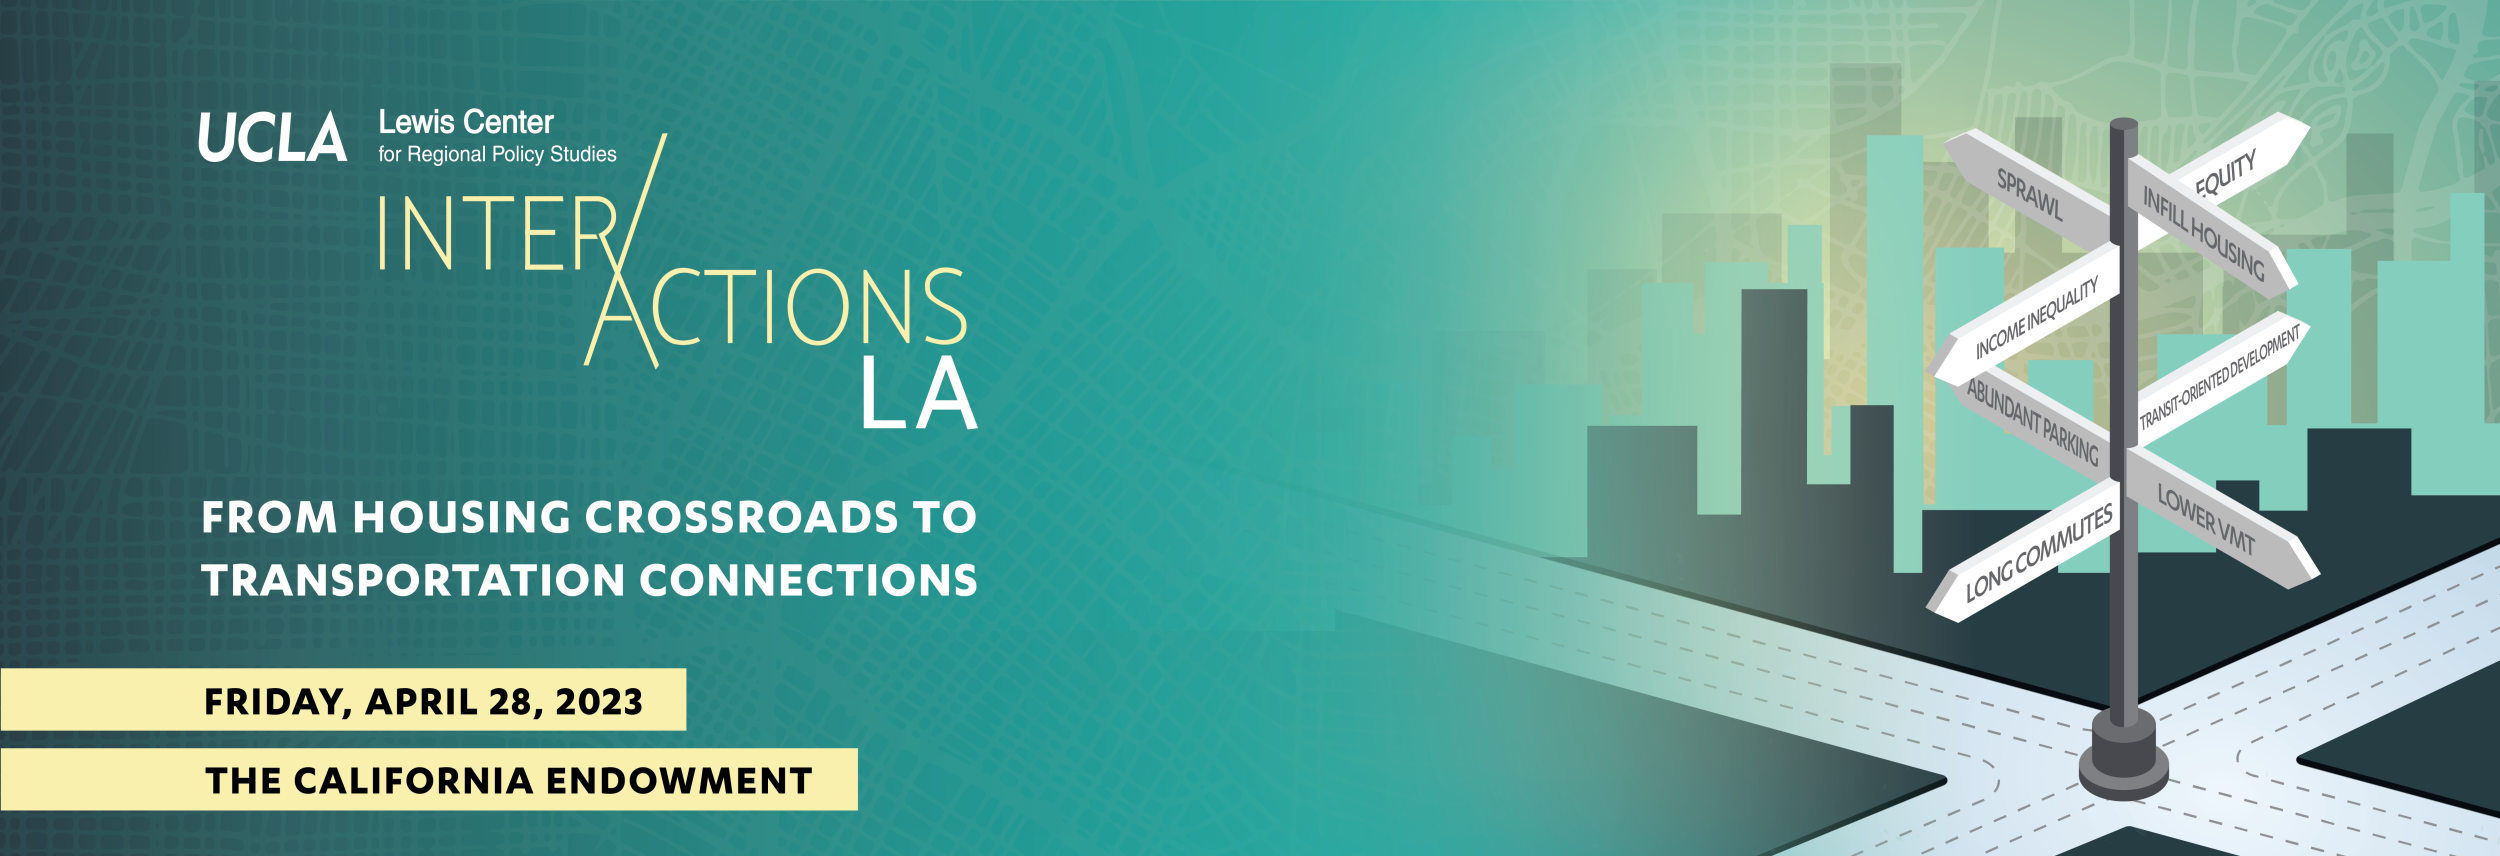 InterActions LA: From Housing Crossroads to Transportation Connections. Friday, April 28, 2023. The California Endowment